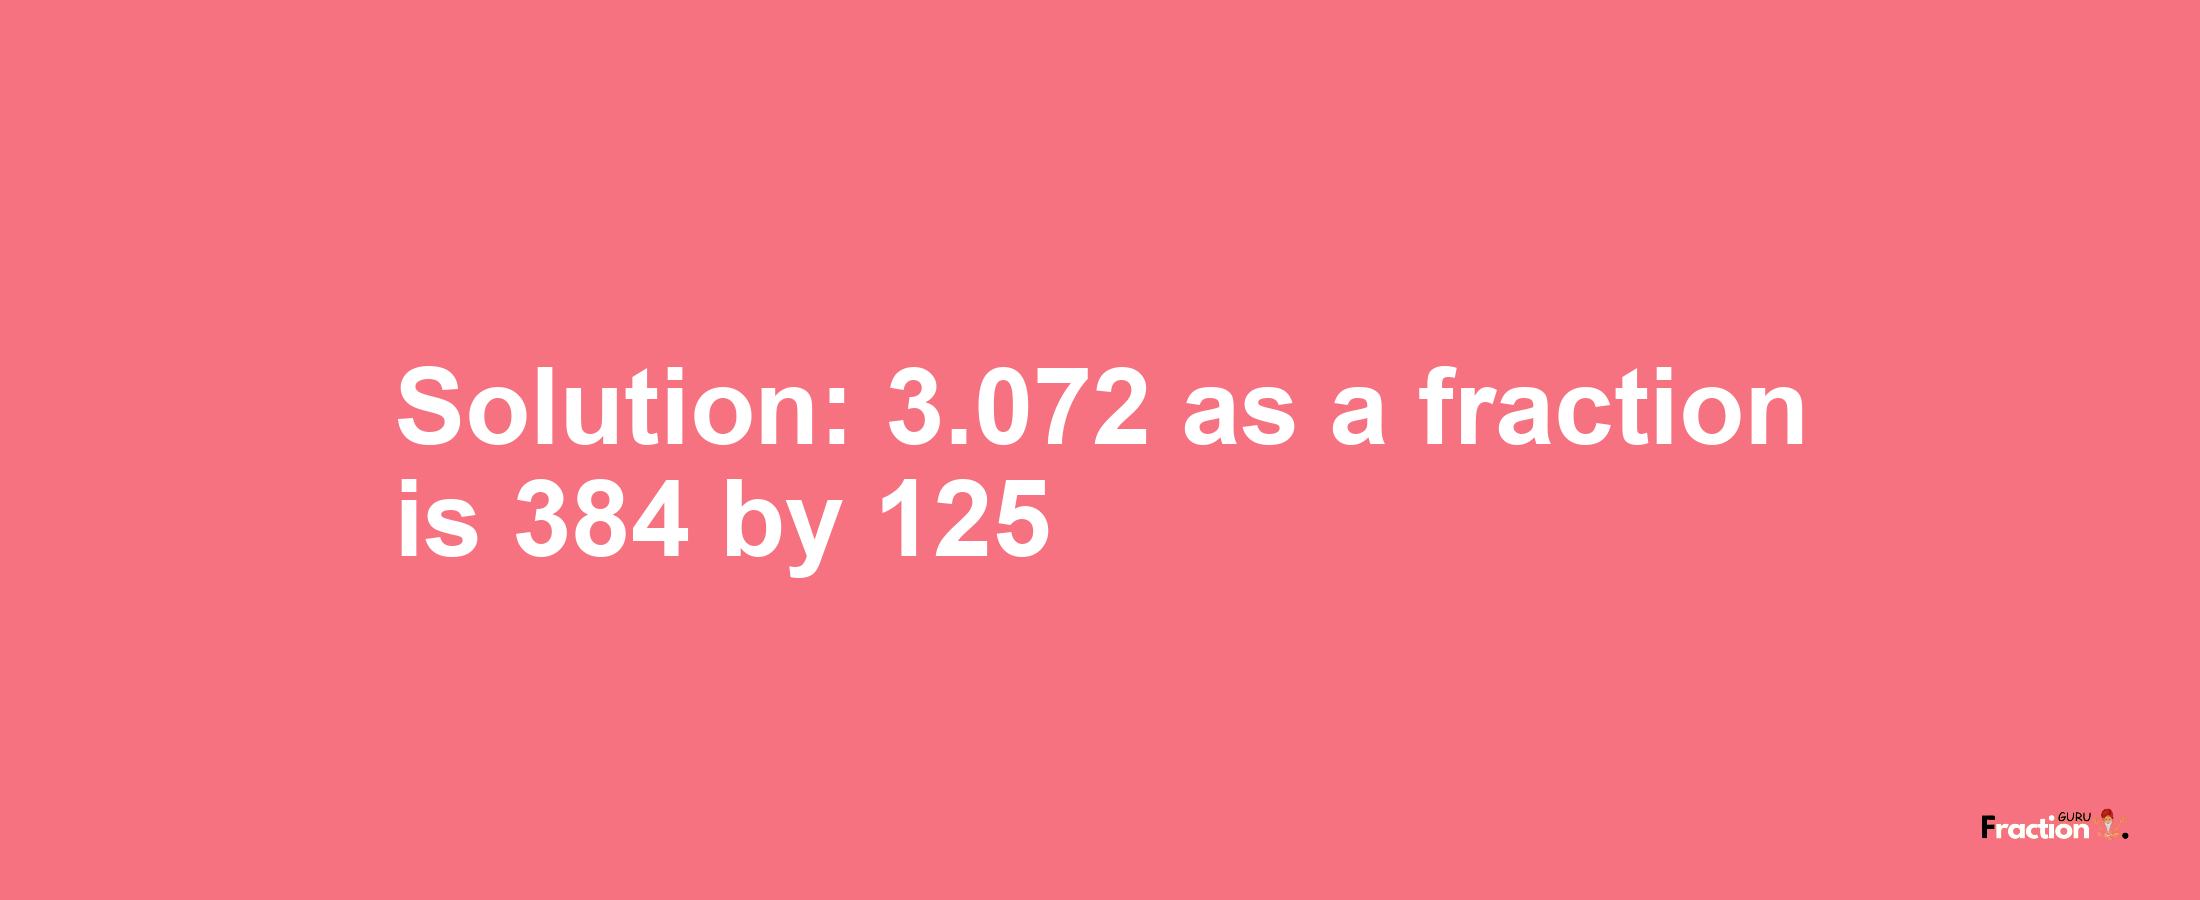 Solution:3.072 as a fraction is 384/125